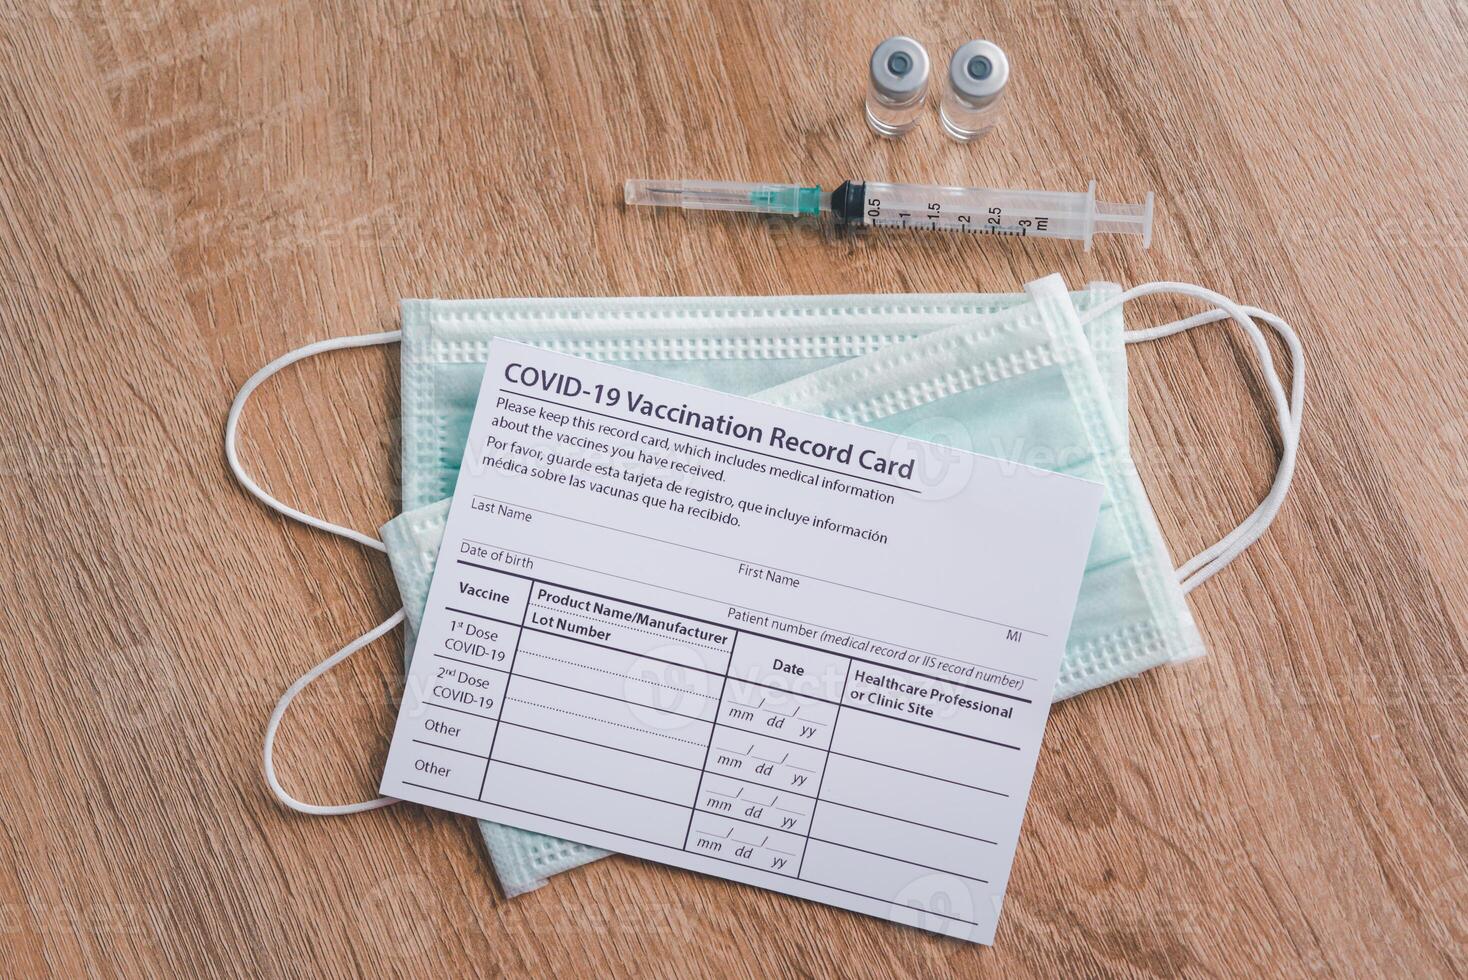 Coronavirus vaccination record card is placed on a wooden floor with a vaccine syringe .patient who has already been vaccinated with Coronavirus .Coronavirus prevention photo